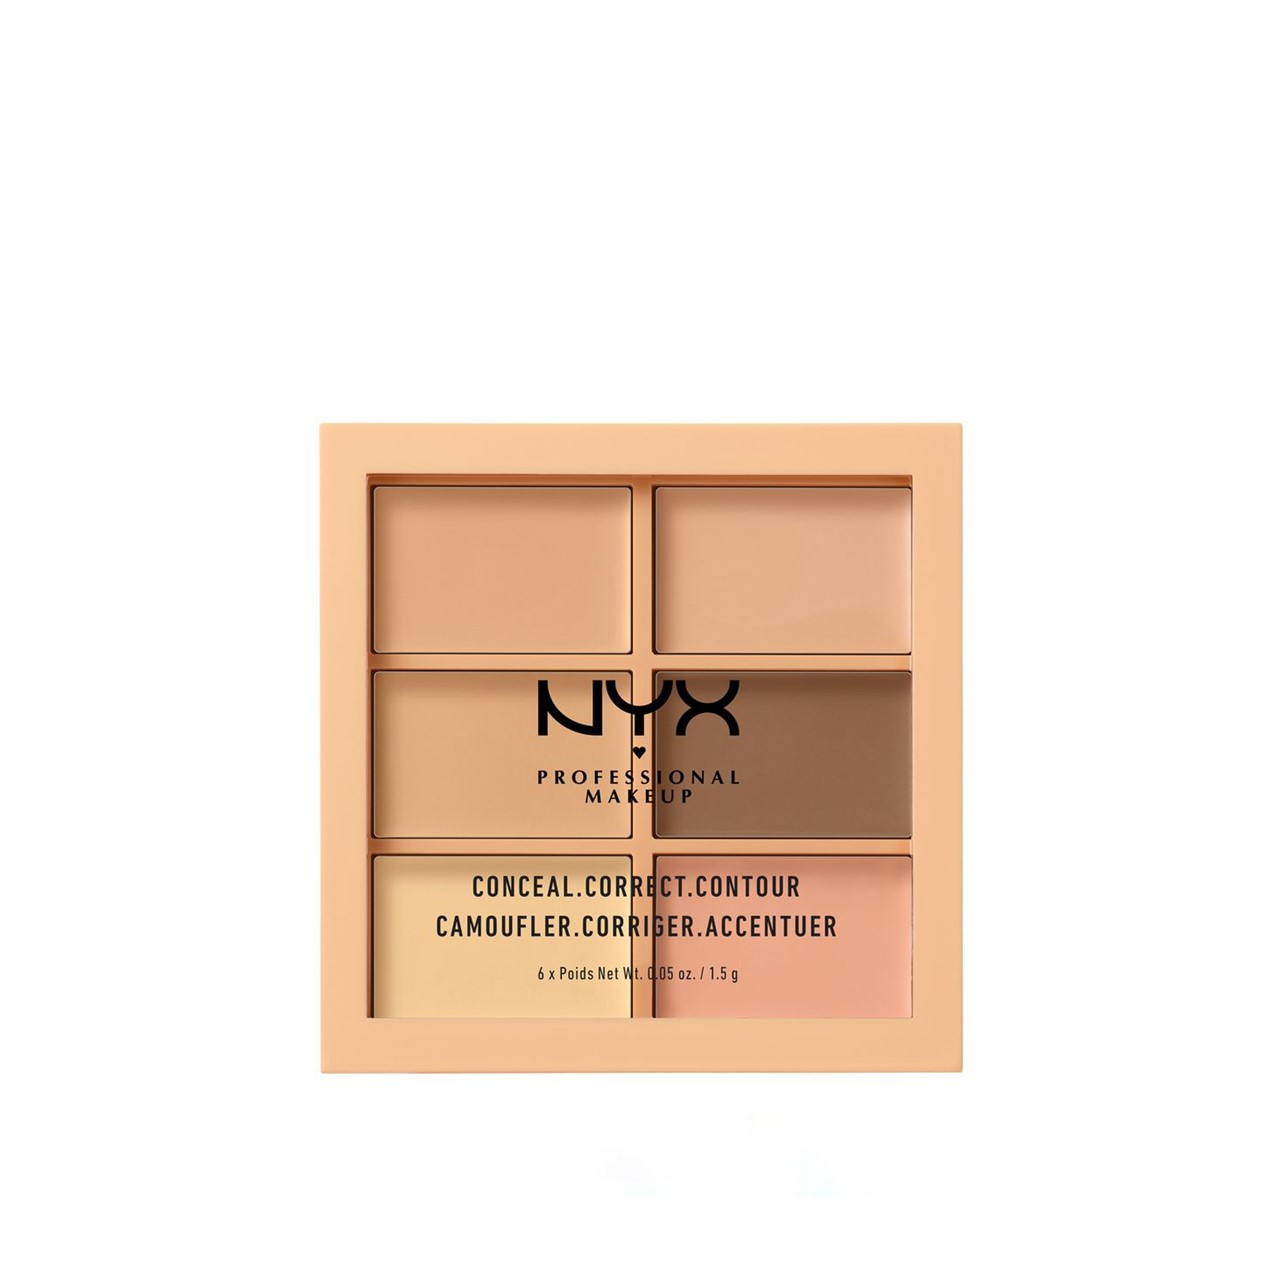 https://static.beautytocare.com/cdn-cgi/image/width=1600,height=1600,f=auto/media/catalog/product//n/y/nyx-pro-makeup-conceal-correct-contour-palette-light.jpg